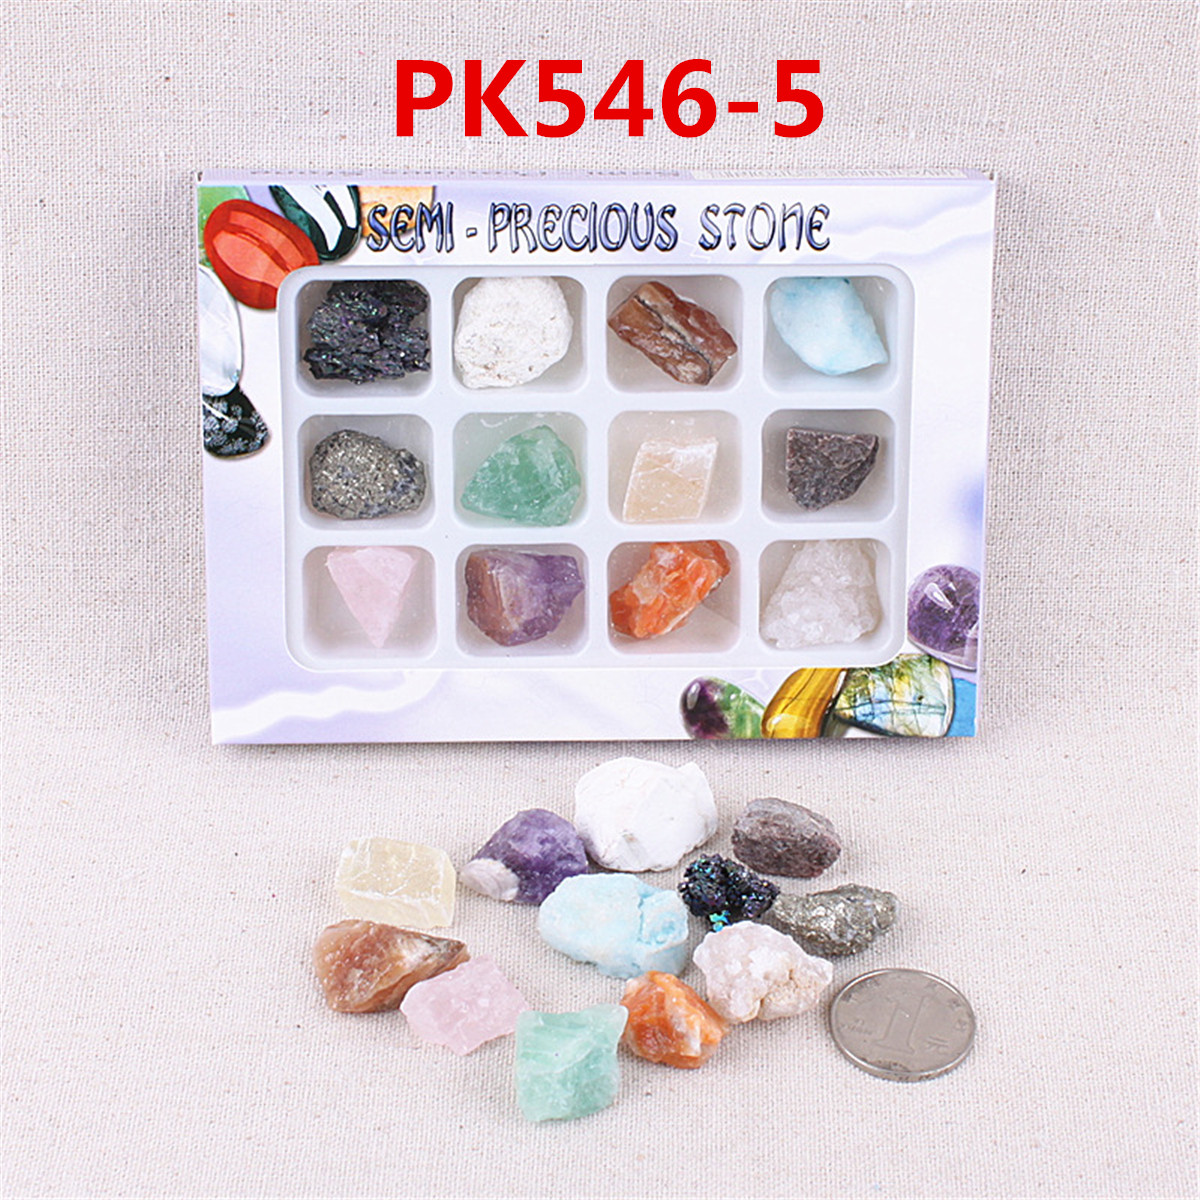 AU Natural Gemstones Stones Variety Collection Crystals Kit Mineral Geological Teaching Materials 13